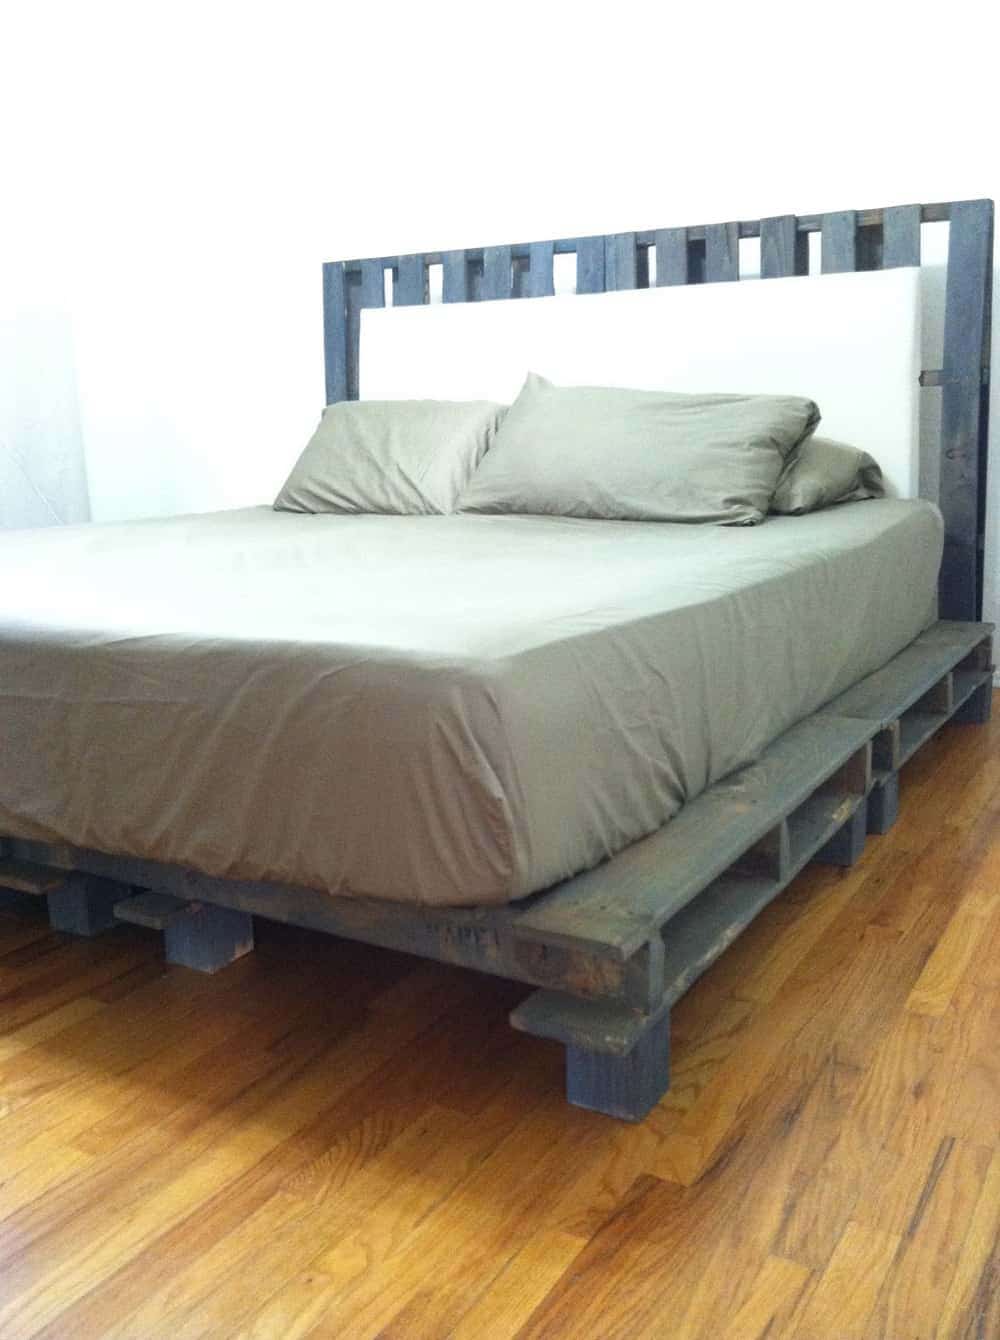 making a pallet bed